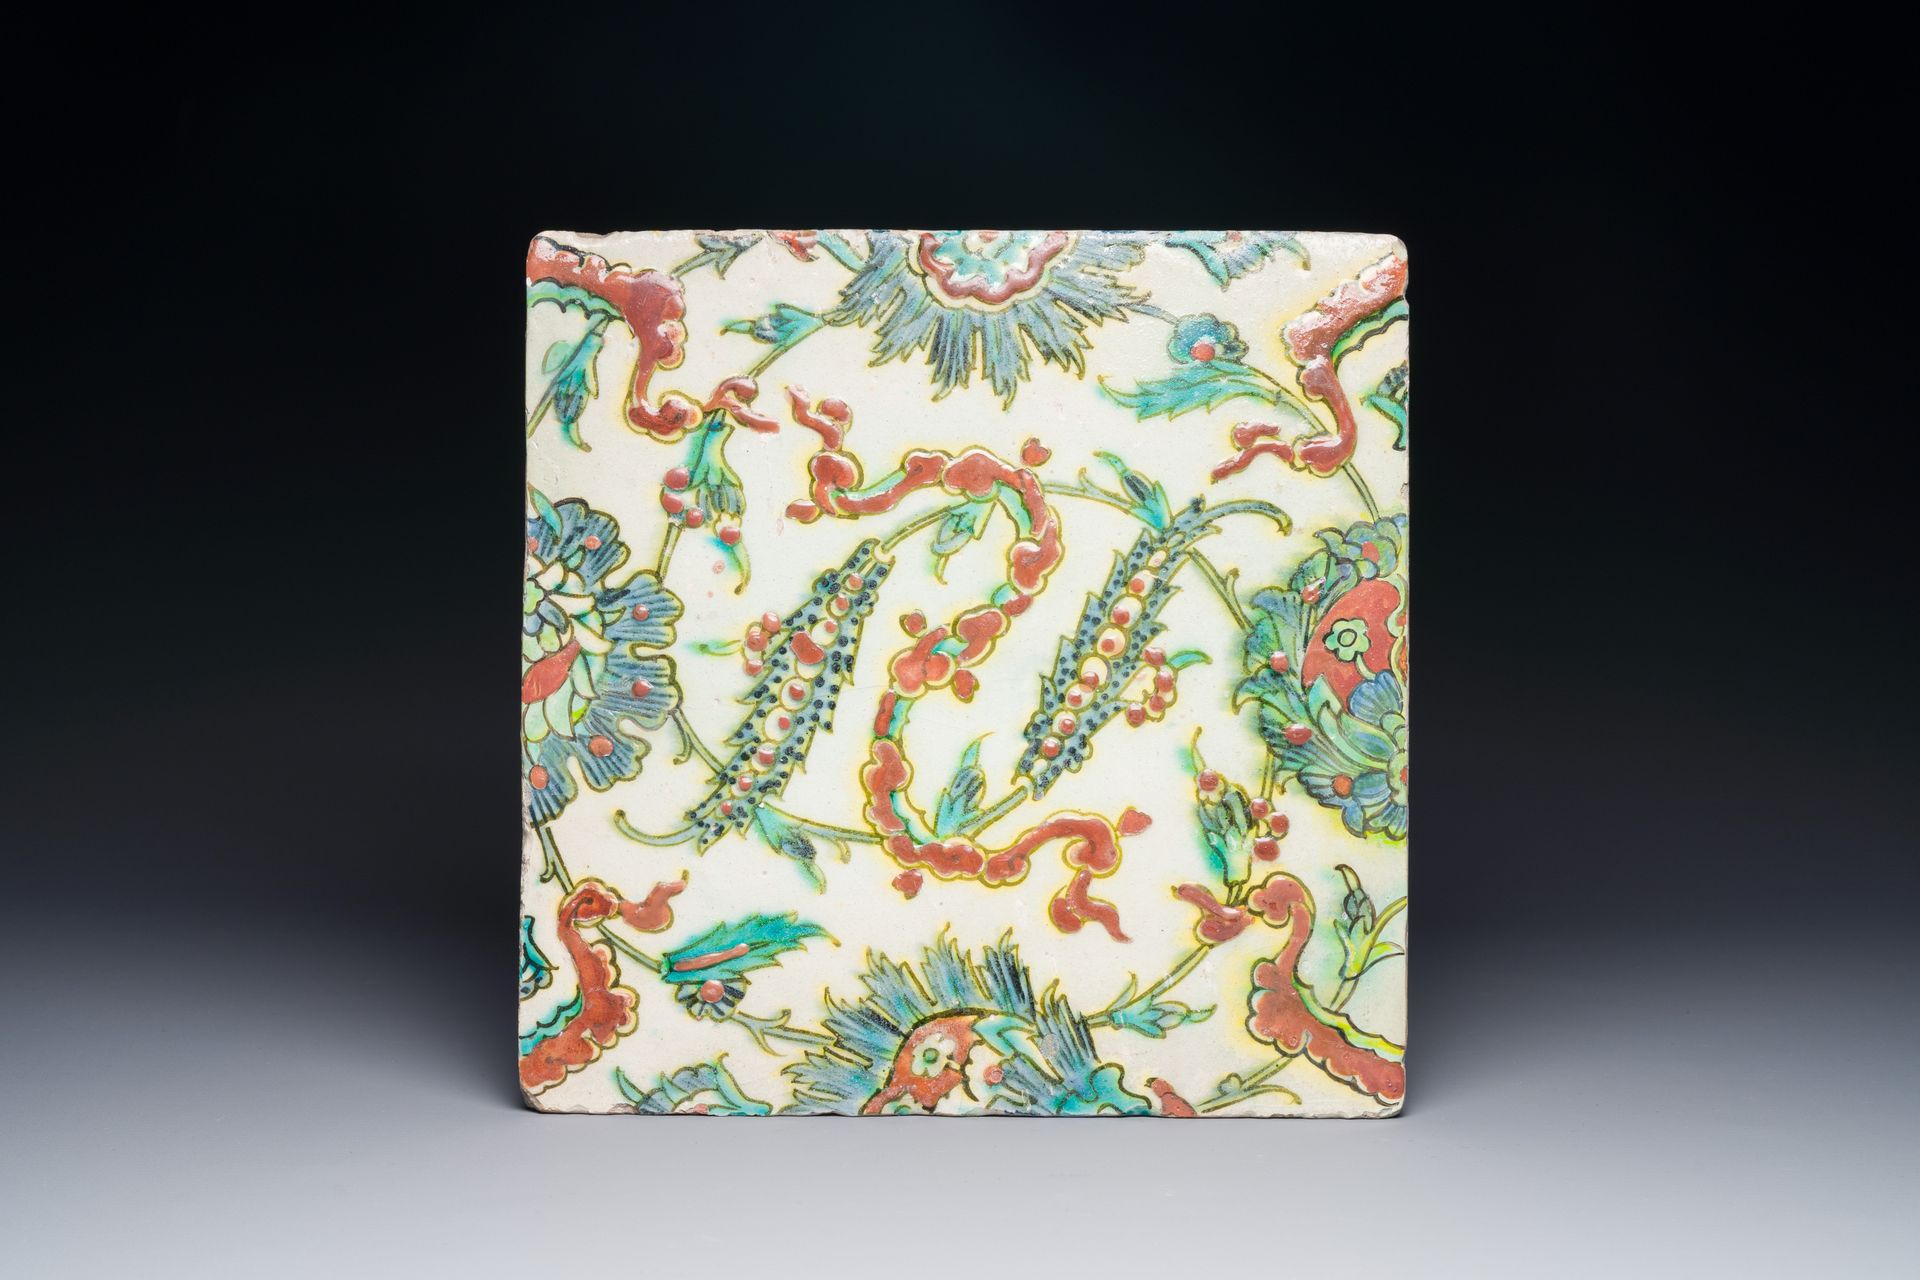 An Iznik tile with floral and cloud-band design, Turkey, 2nd half 16th C. Azulej&hellip;